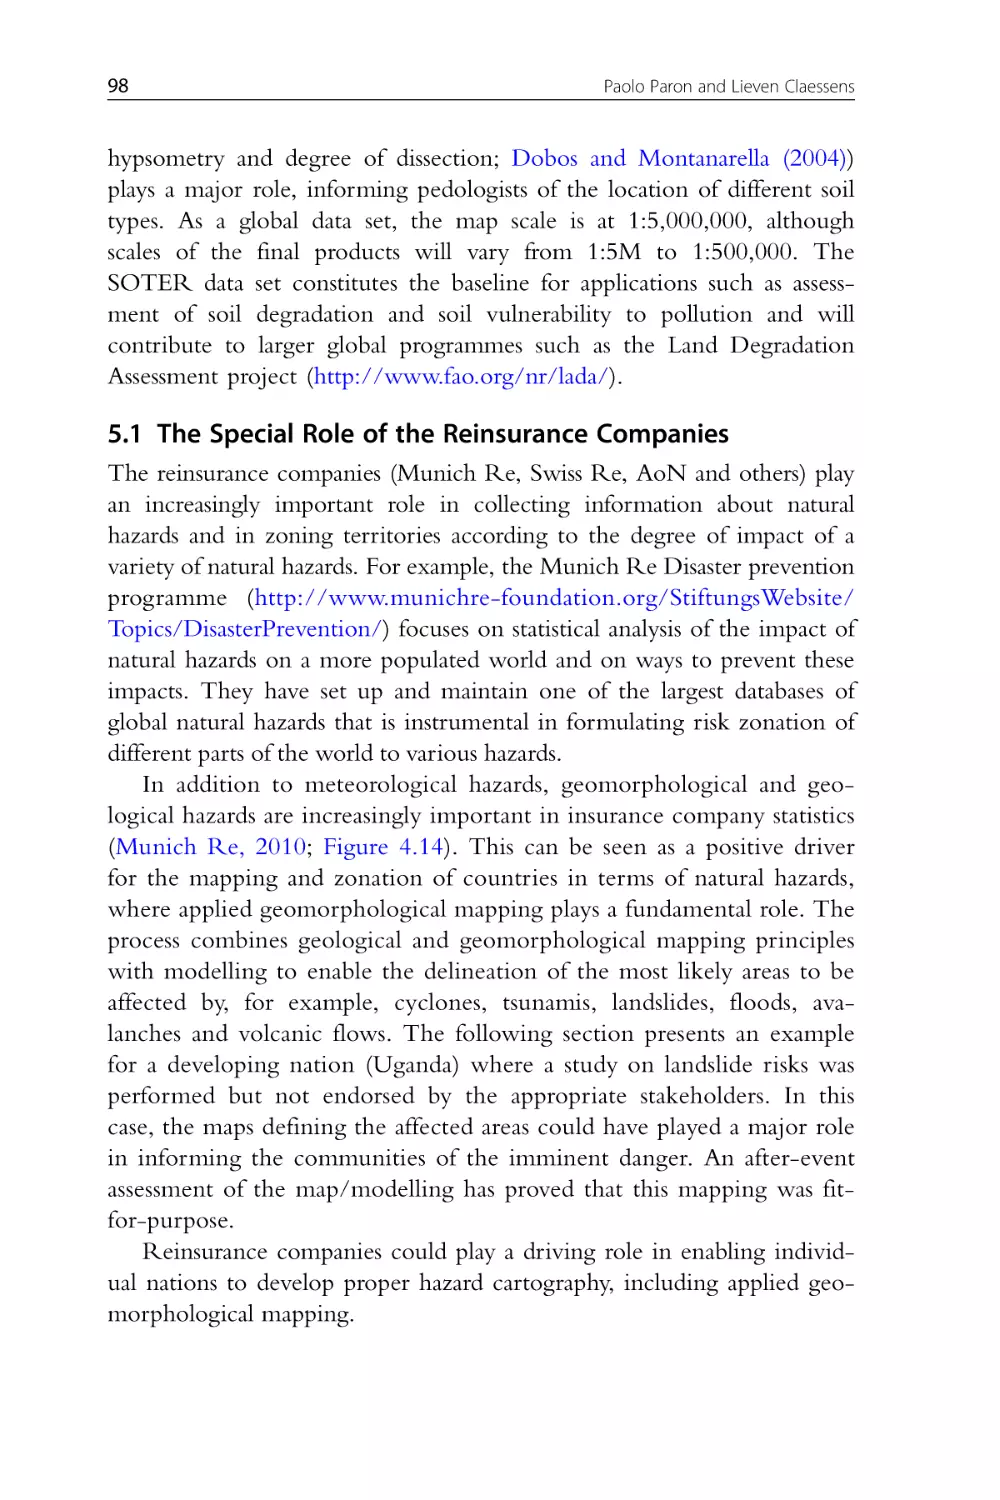 5.1 The Special Role of the Reinsurance Companies